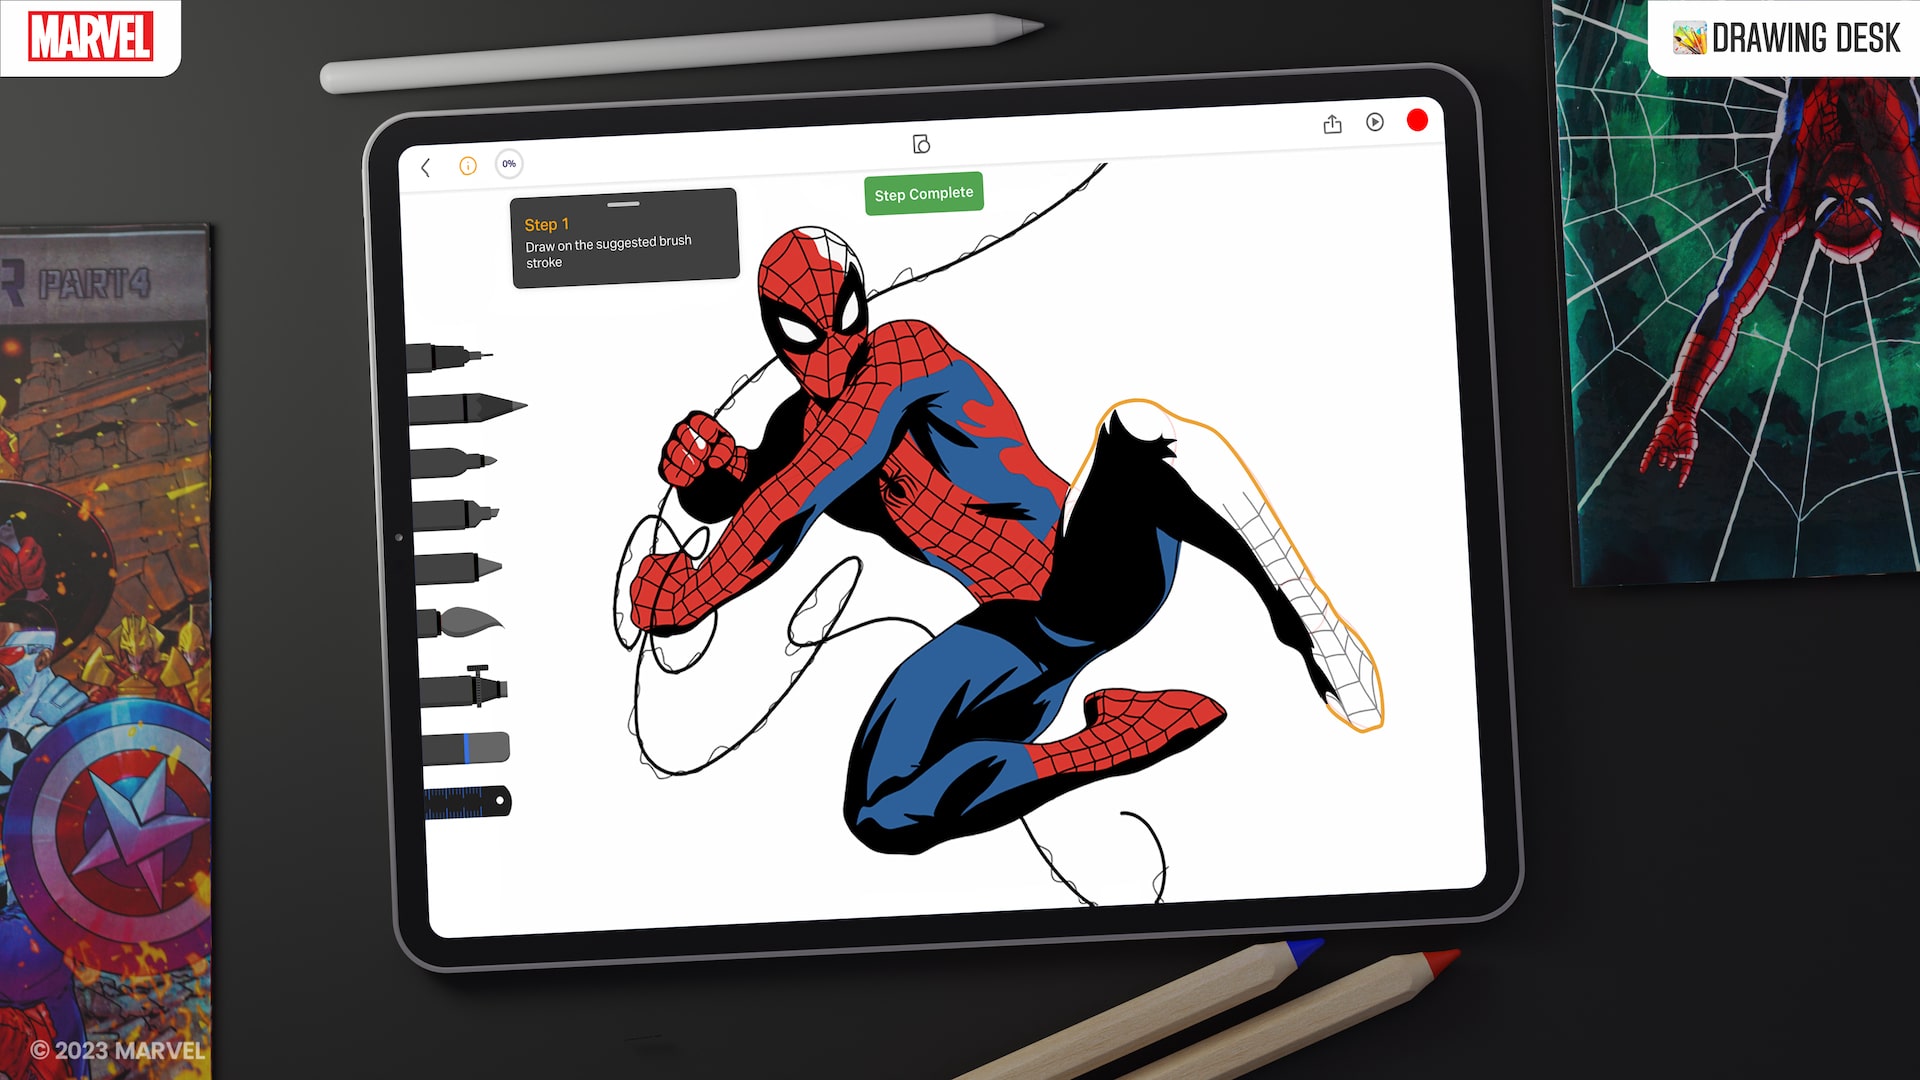 4Axis Technologies and Marvel Comics team up for drawing lessons starting September 14